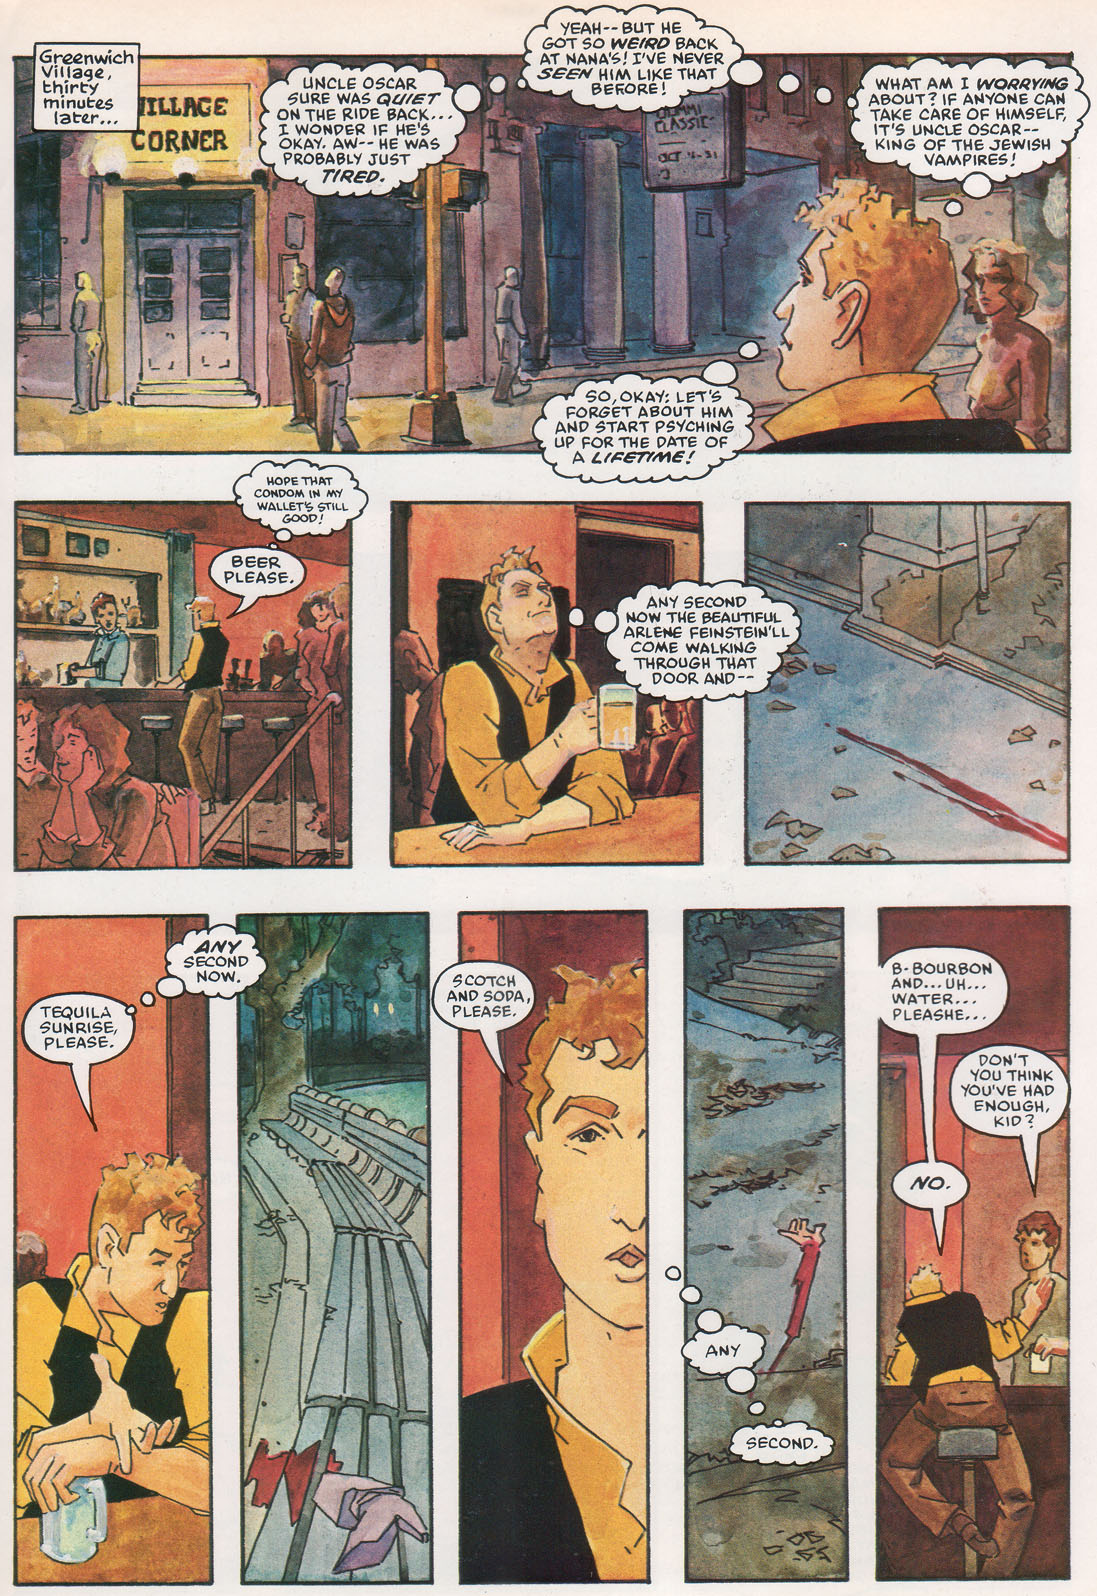 Marvel Graphic Novel issue 20 - Greenberg the Vampire - Page 23